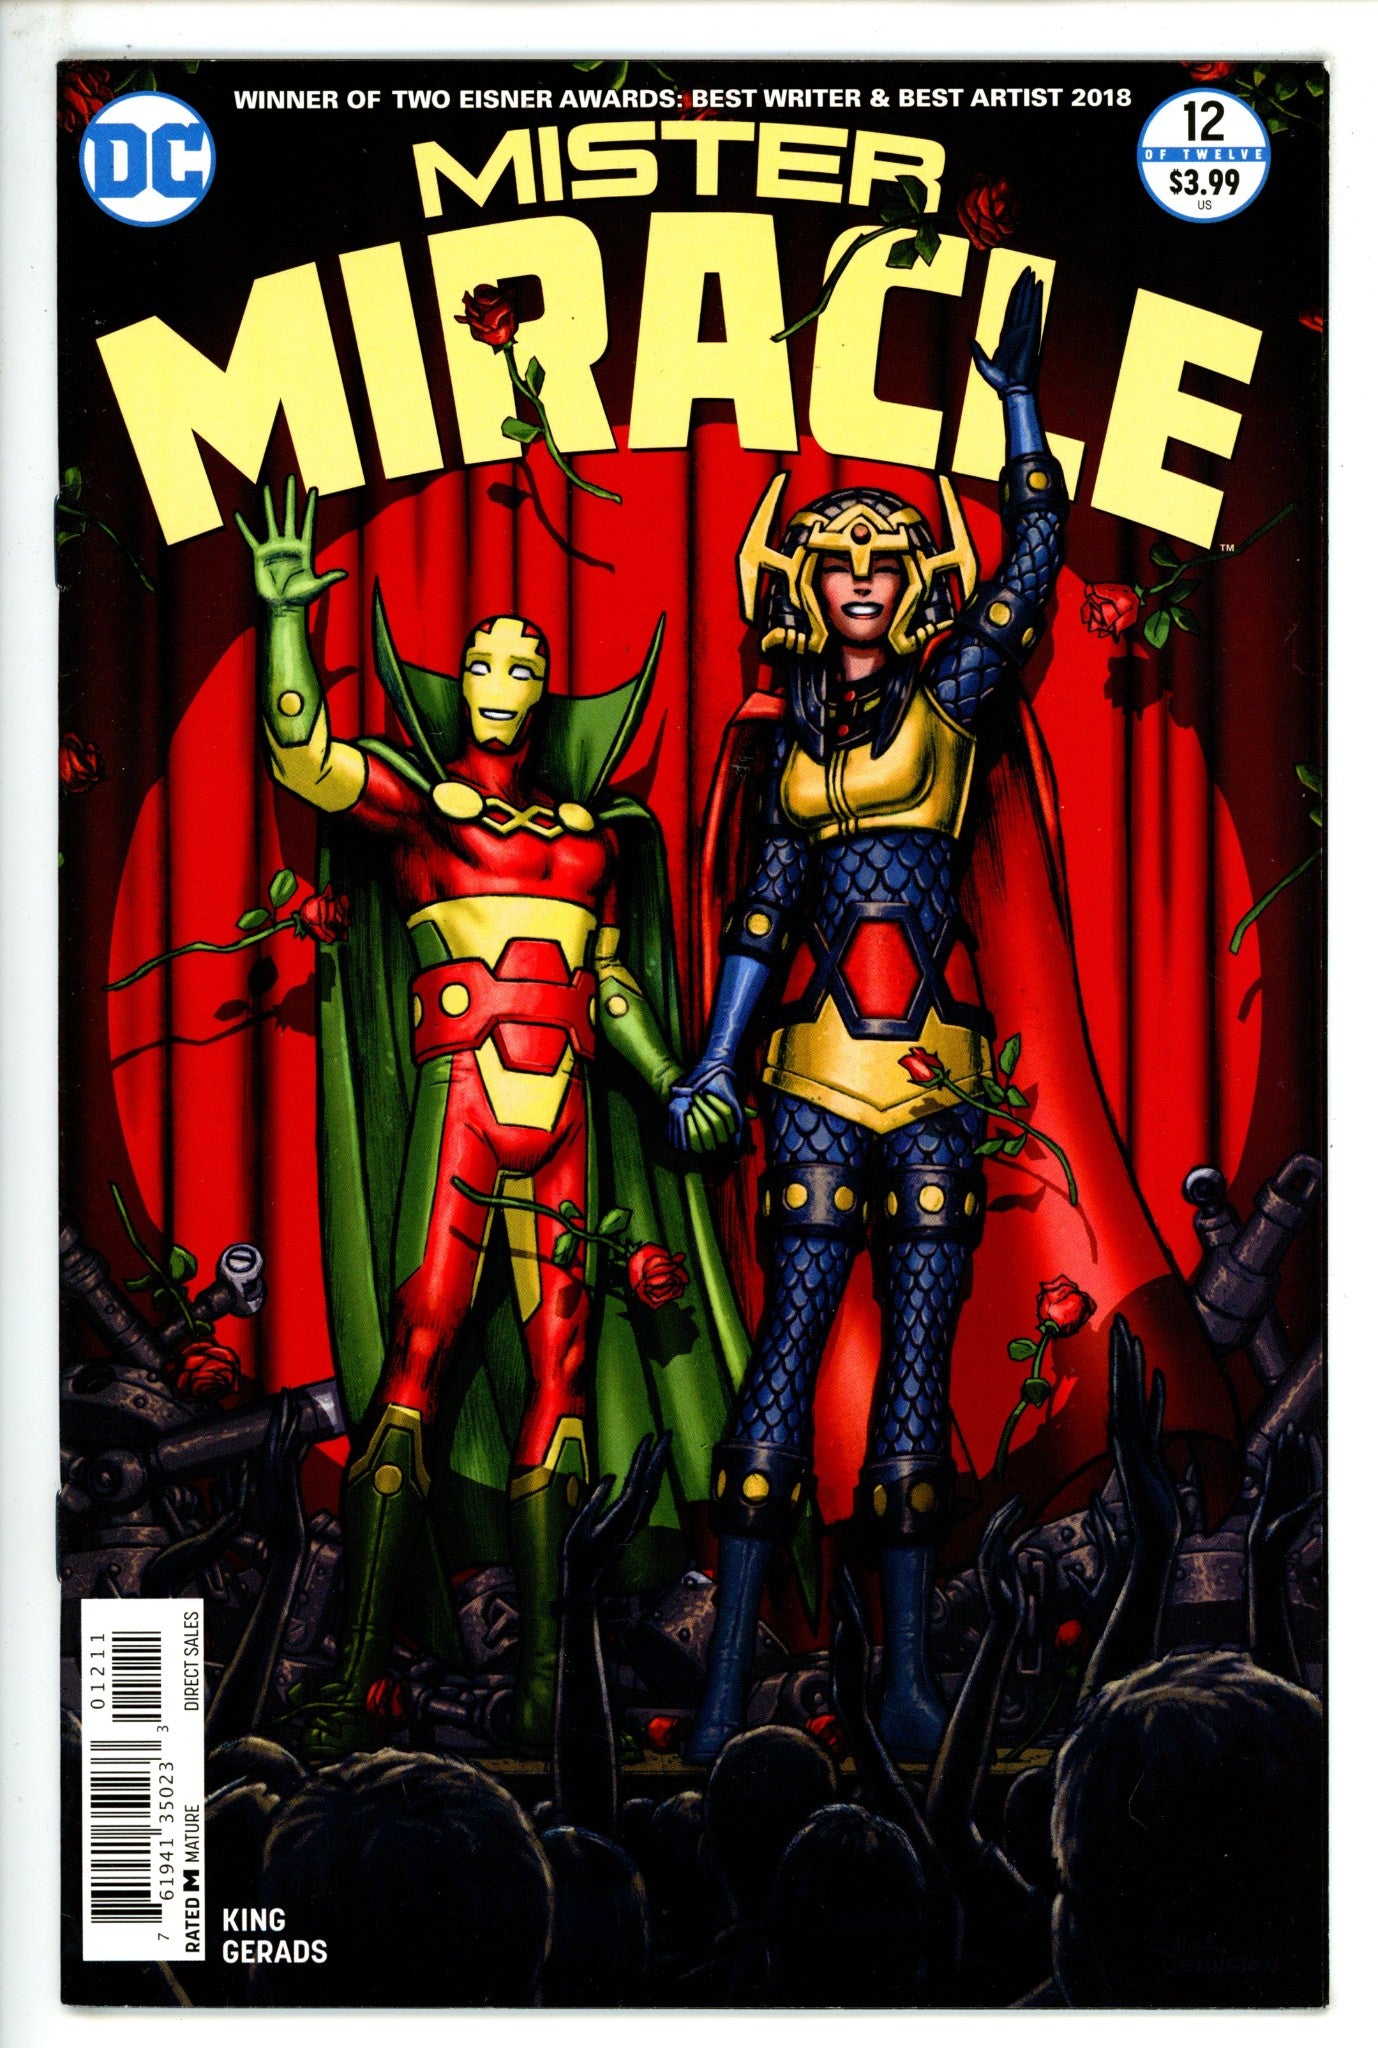 Mister Miracle Vol 4 12 High Grade (2019) 